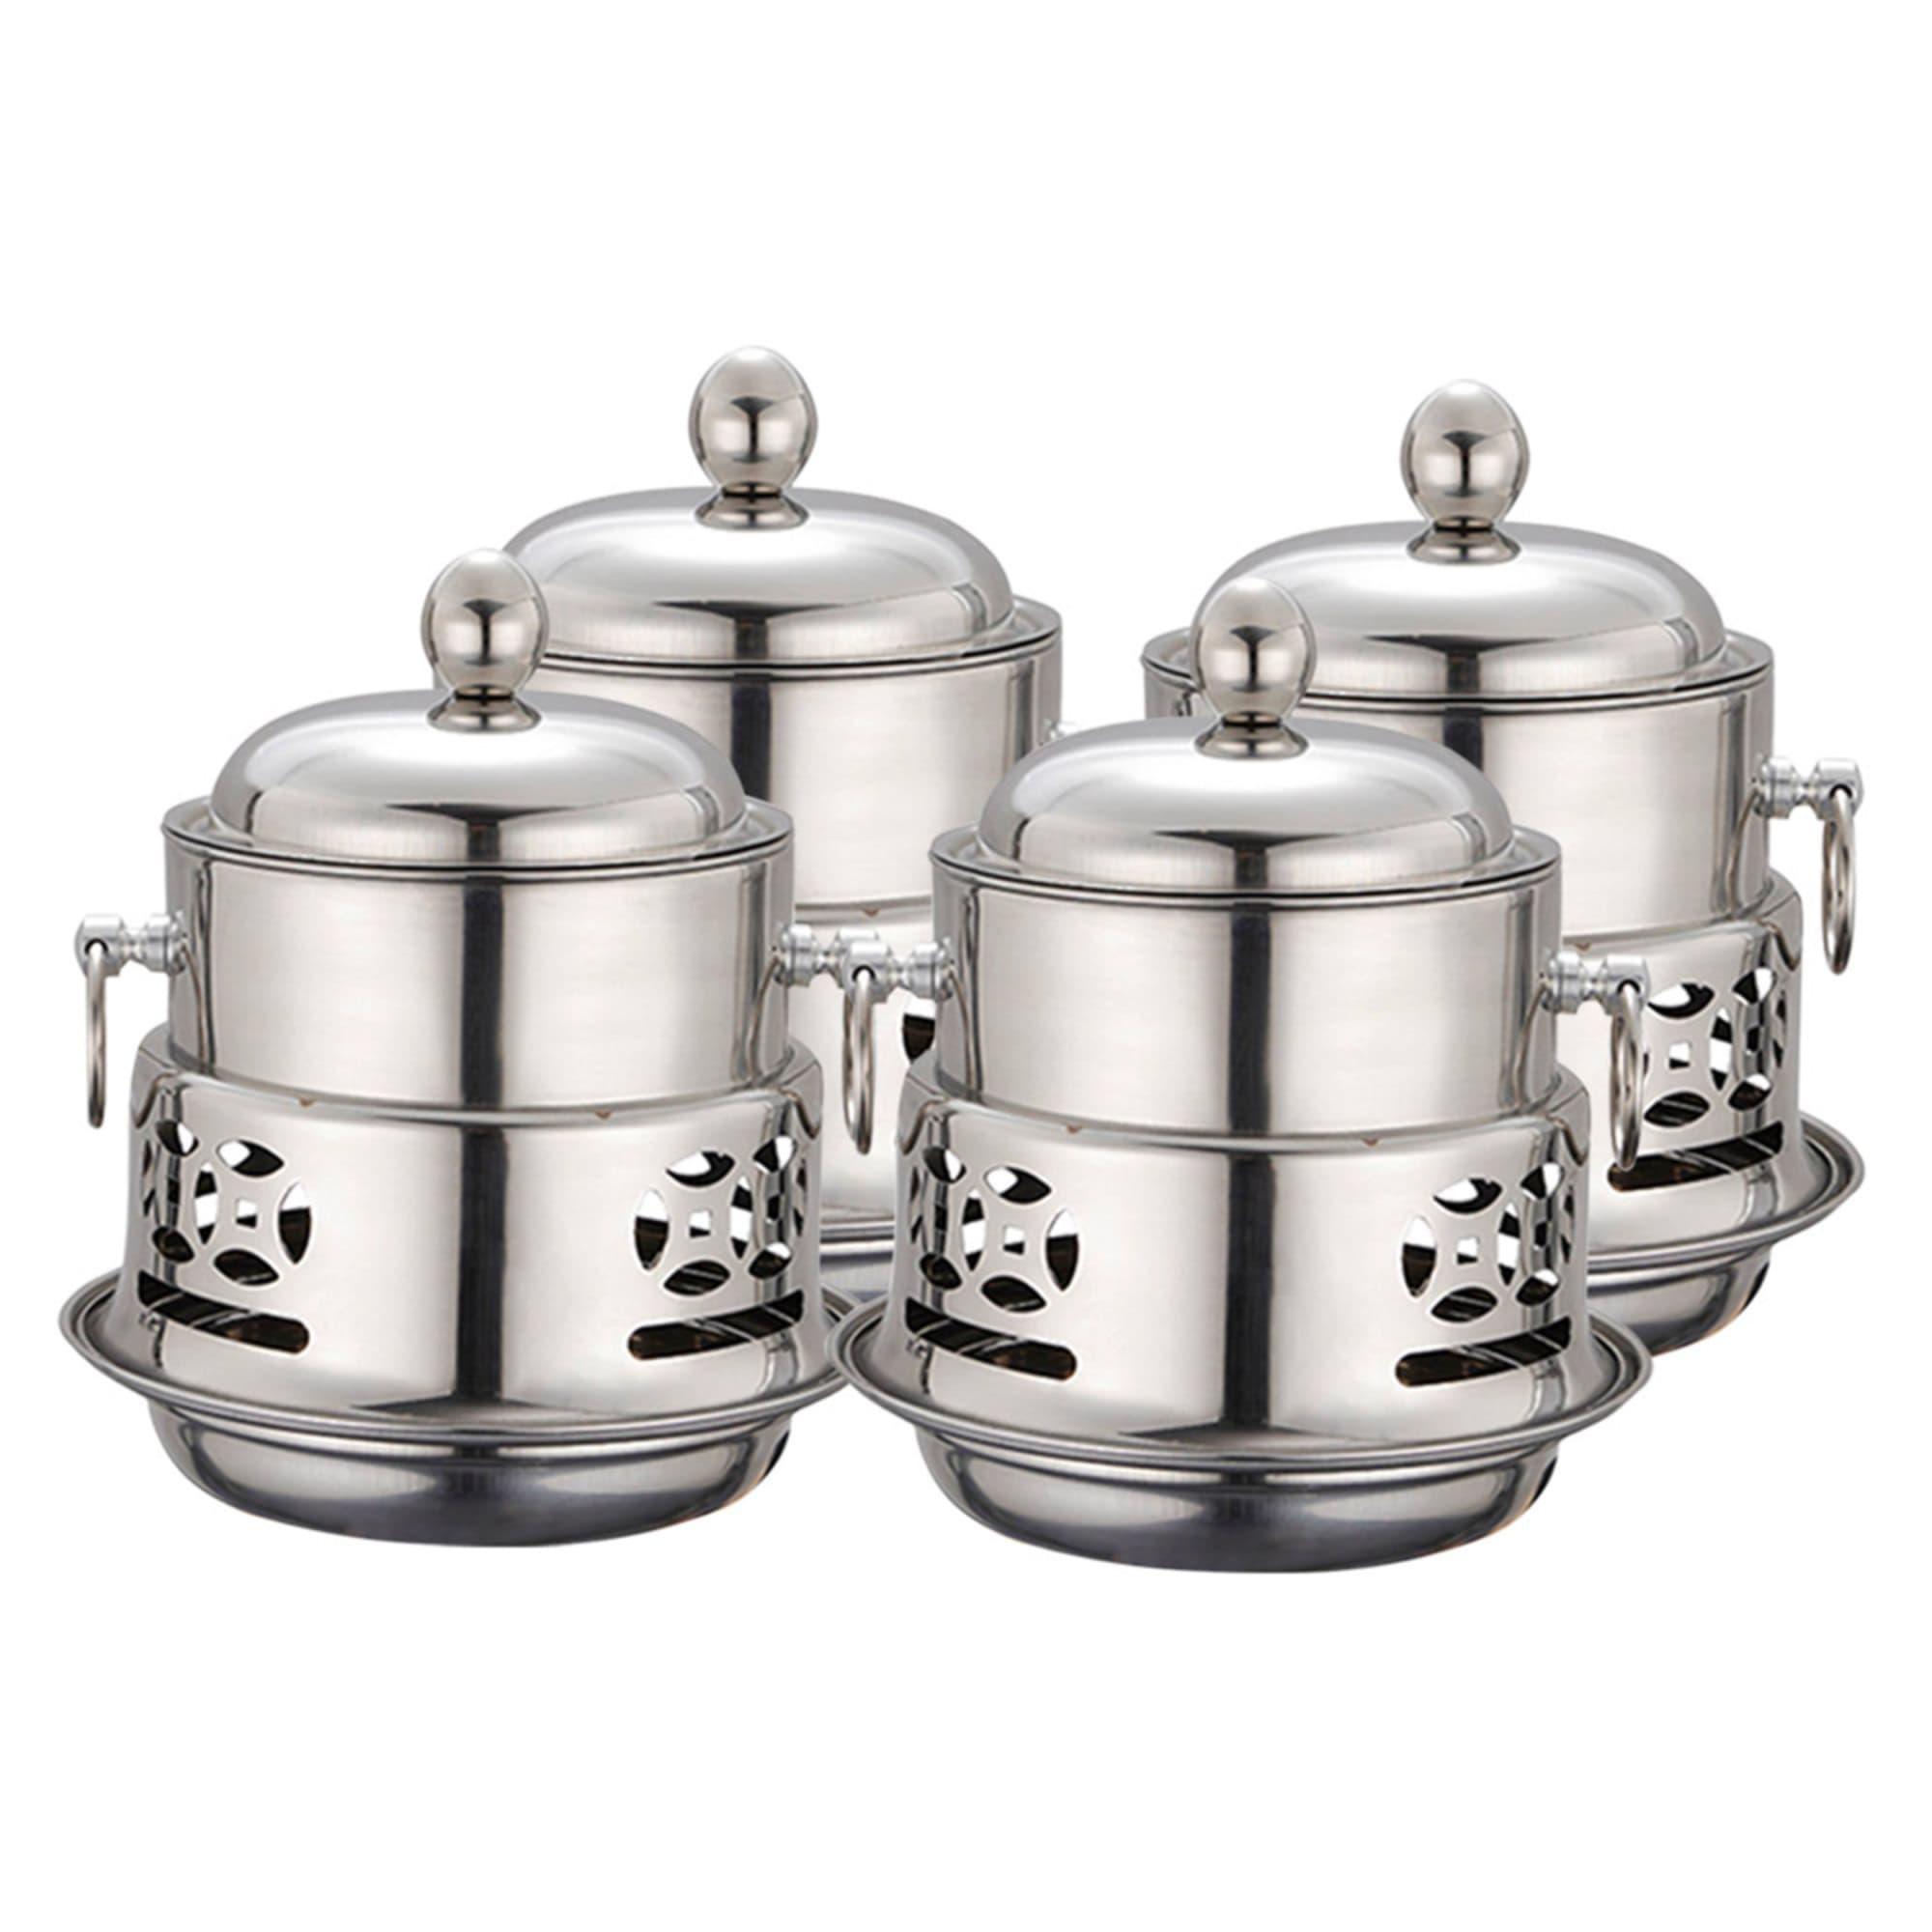 Soga Round Stainless Steel Single Hot Pot with Lid 23cm Set of 4 Image 1